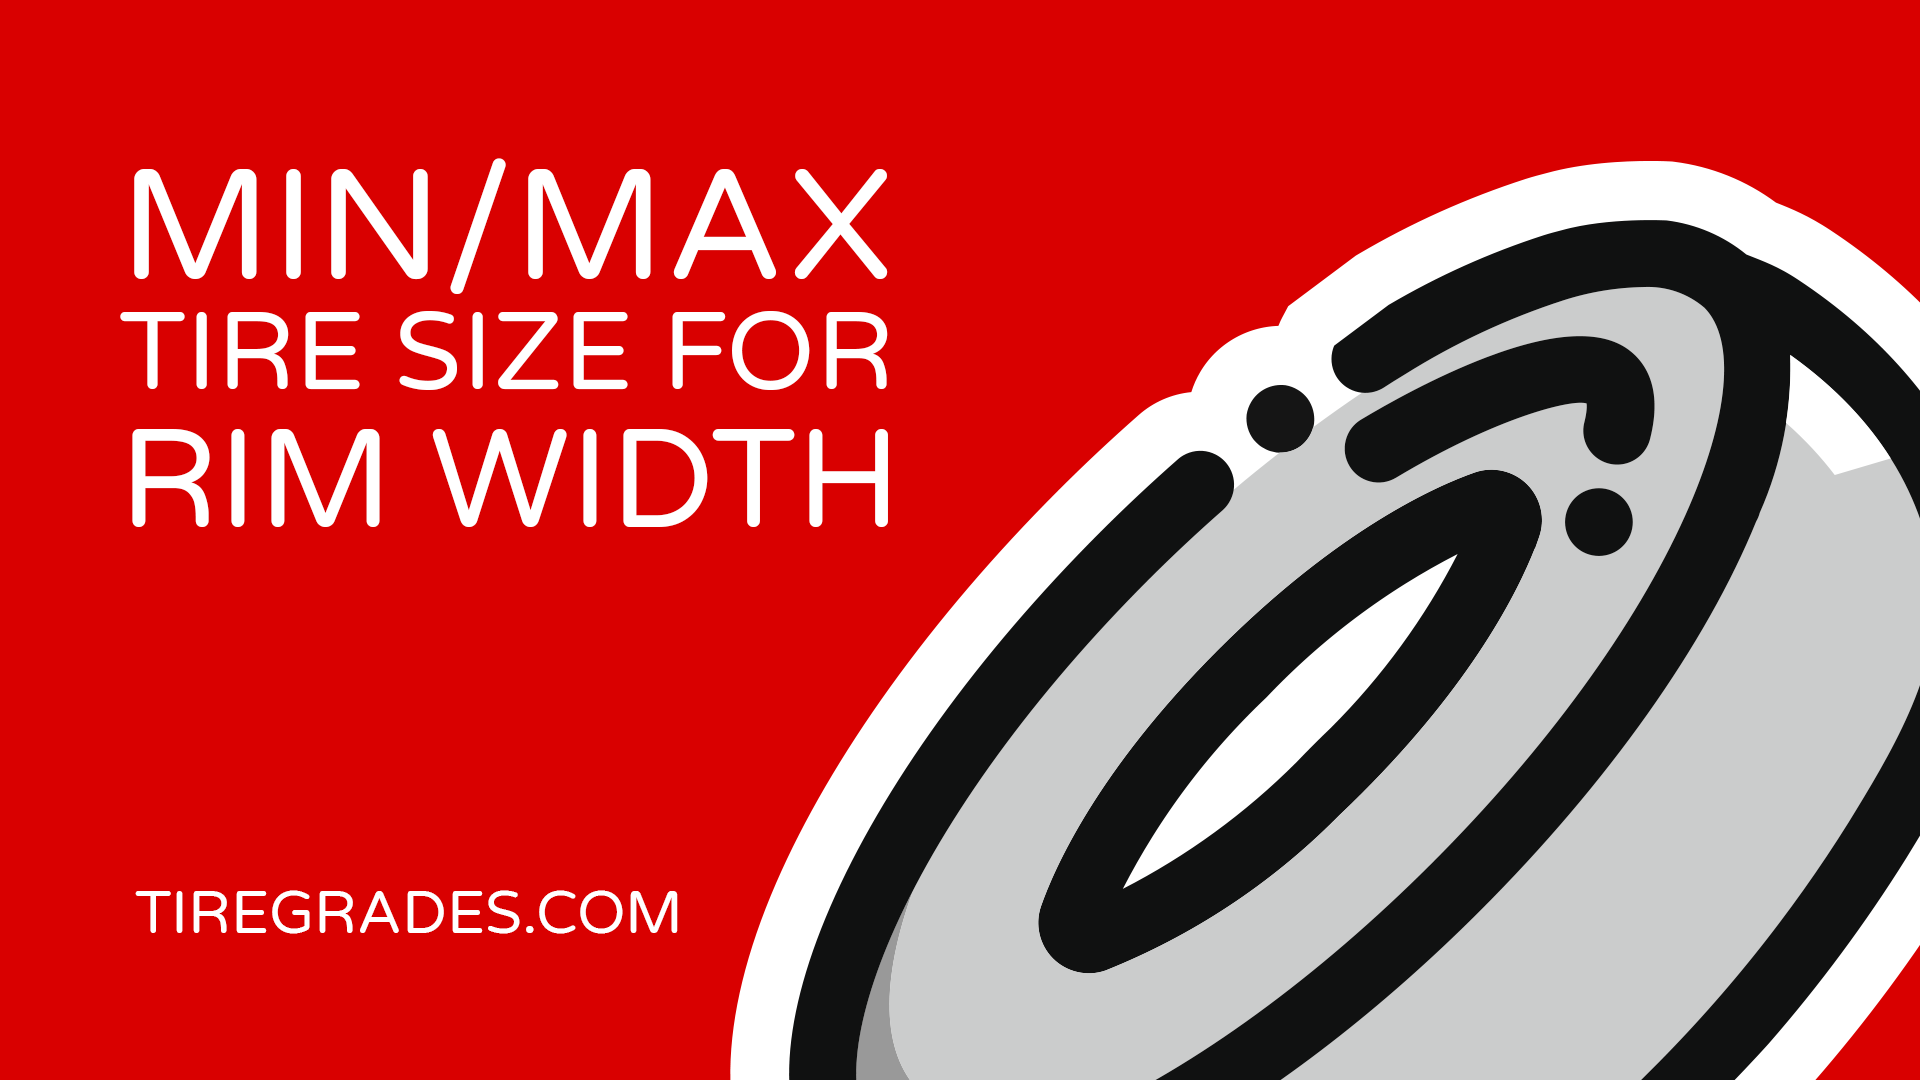 min/max tire size for rim width video poster